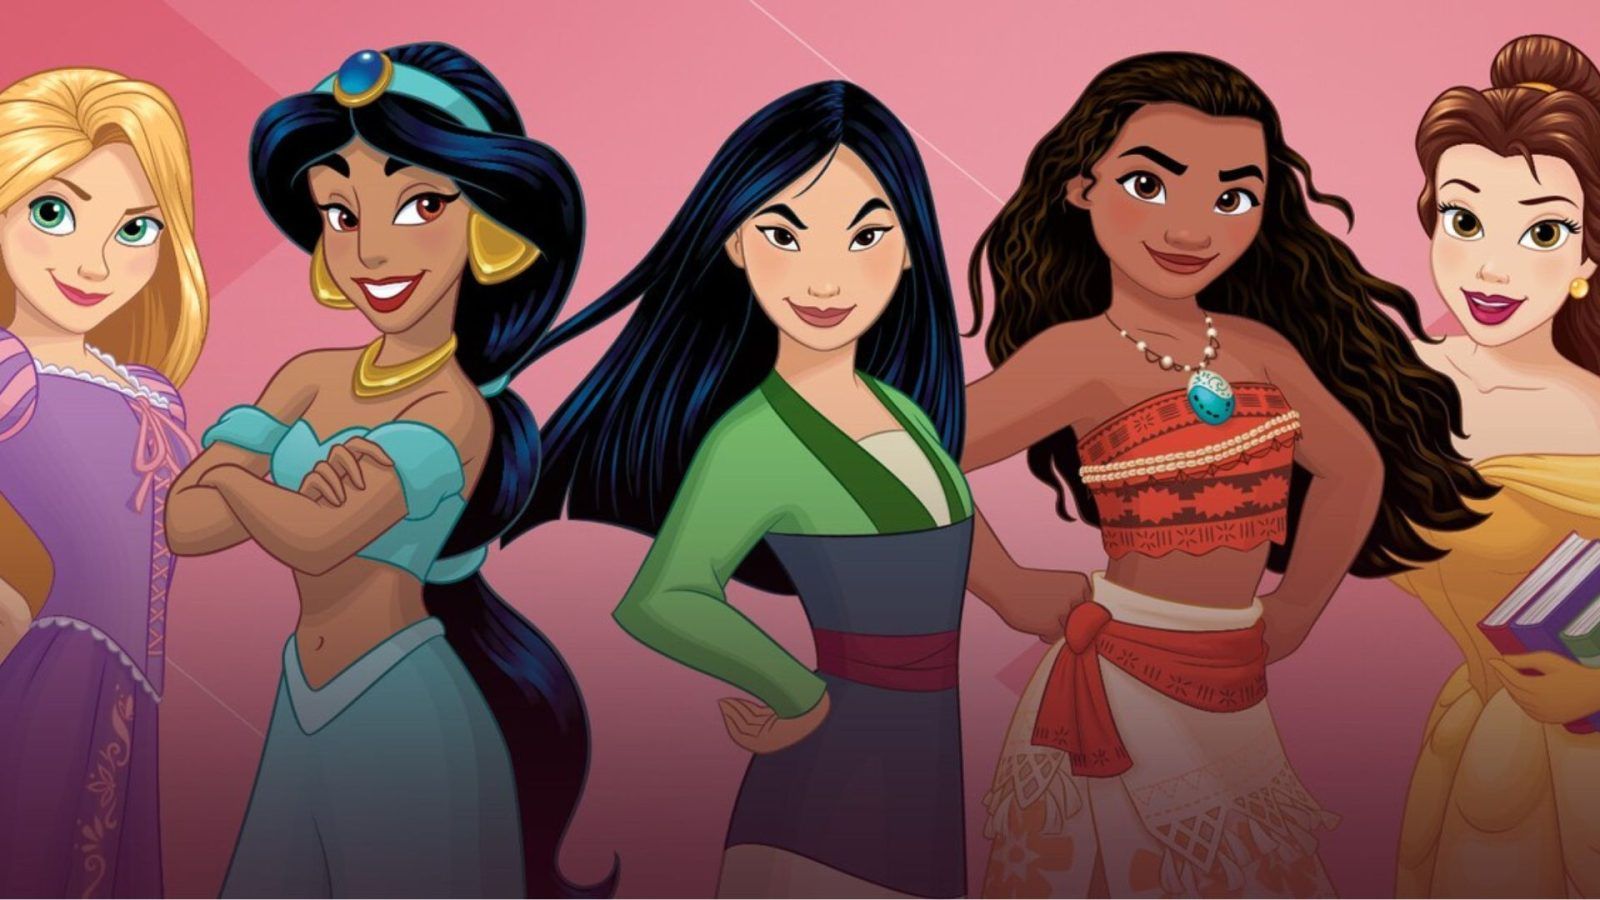 Best Disney princesses that are no damsels in distress